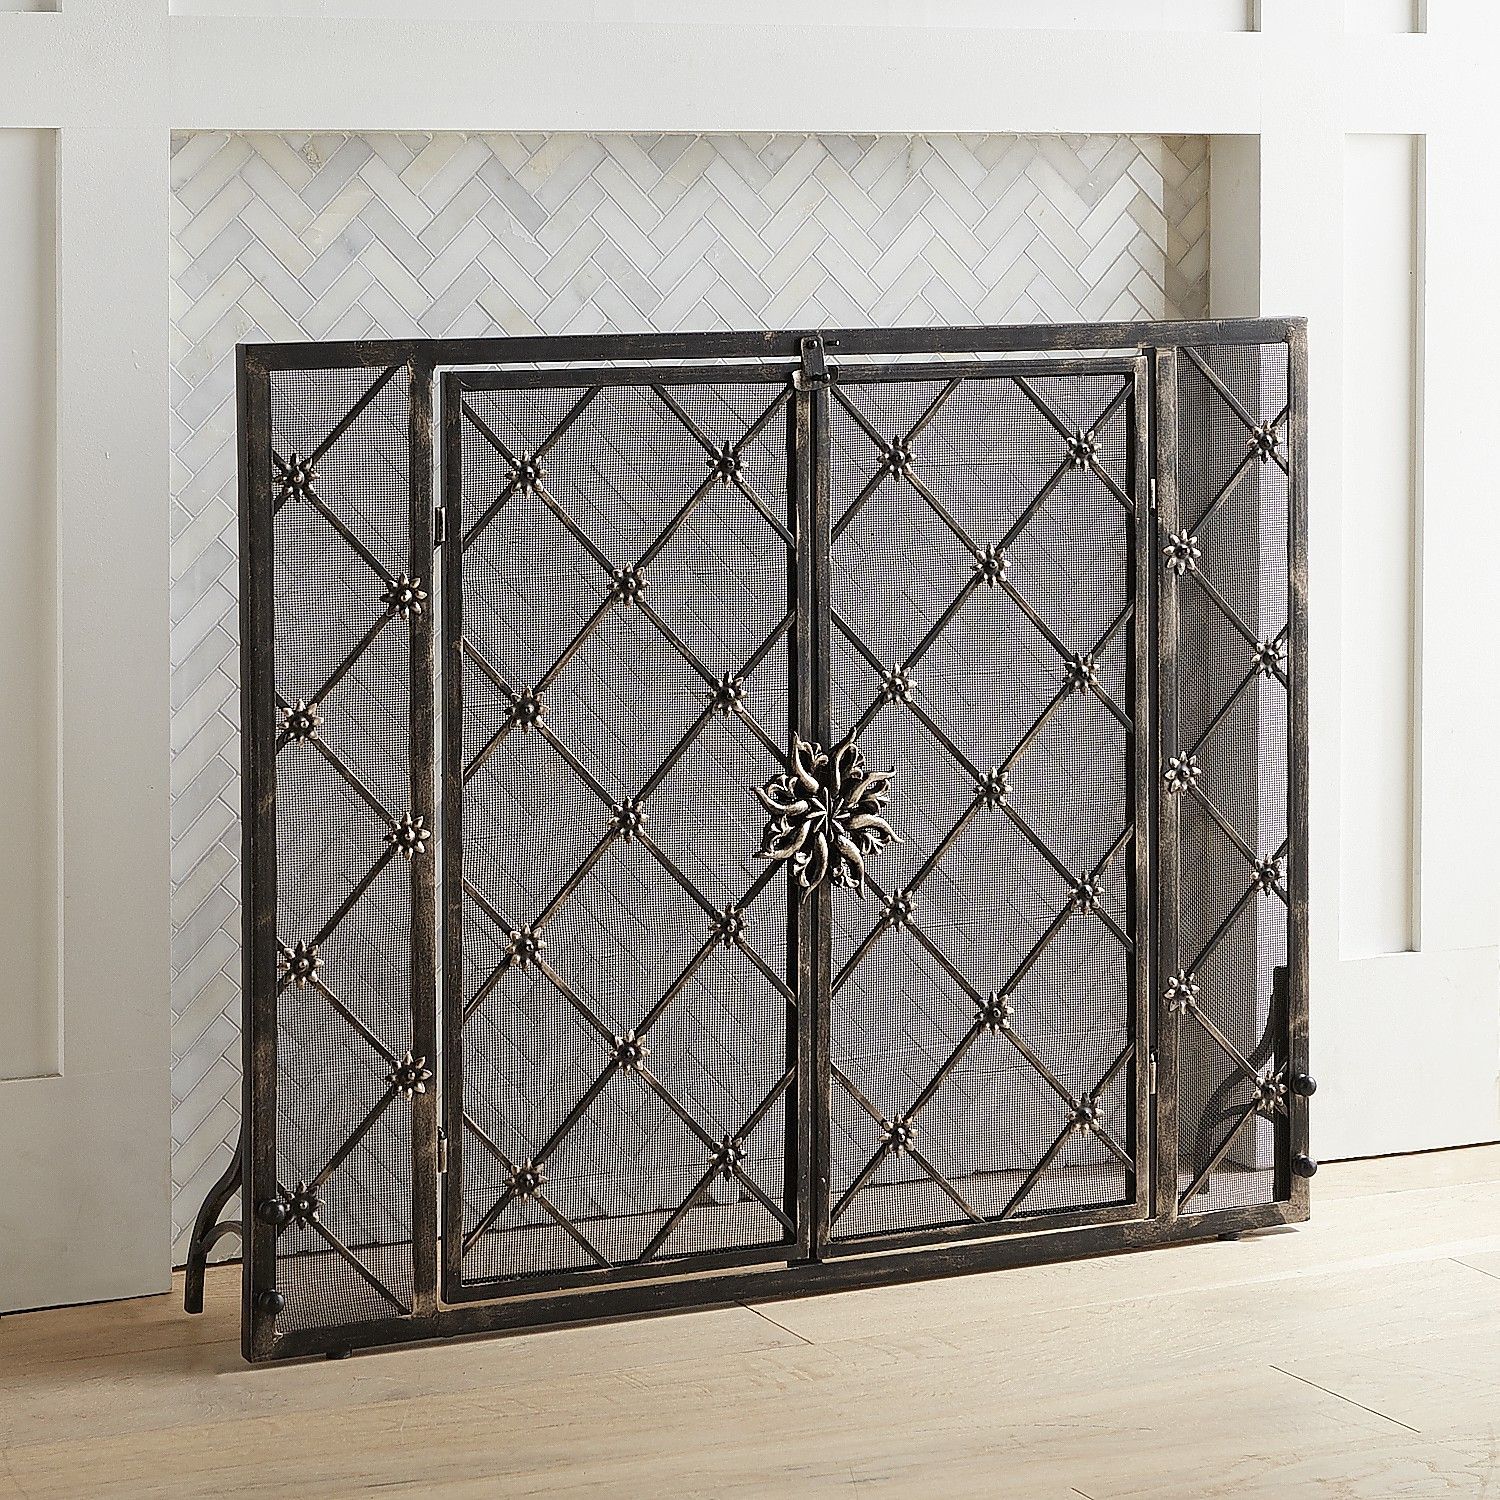 Victorian Fireplace Screen Elegant Junction Fireplace Screen In 2019 Products